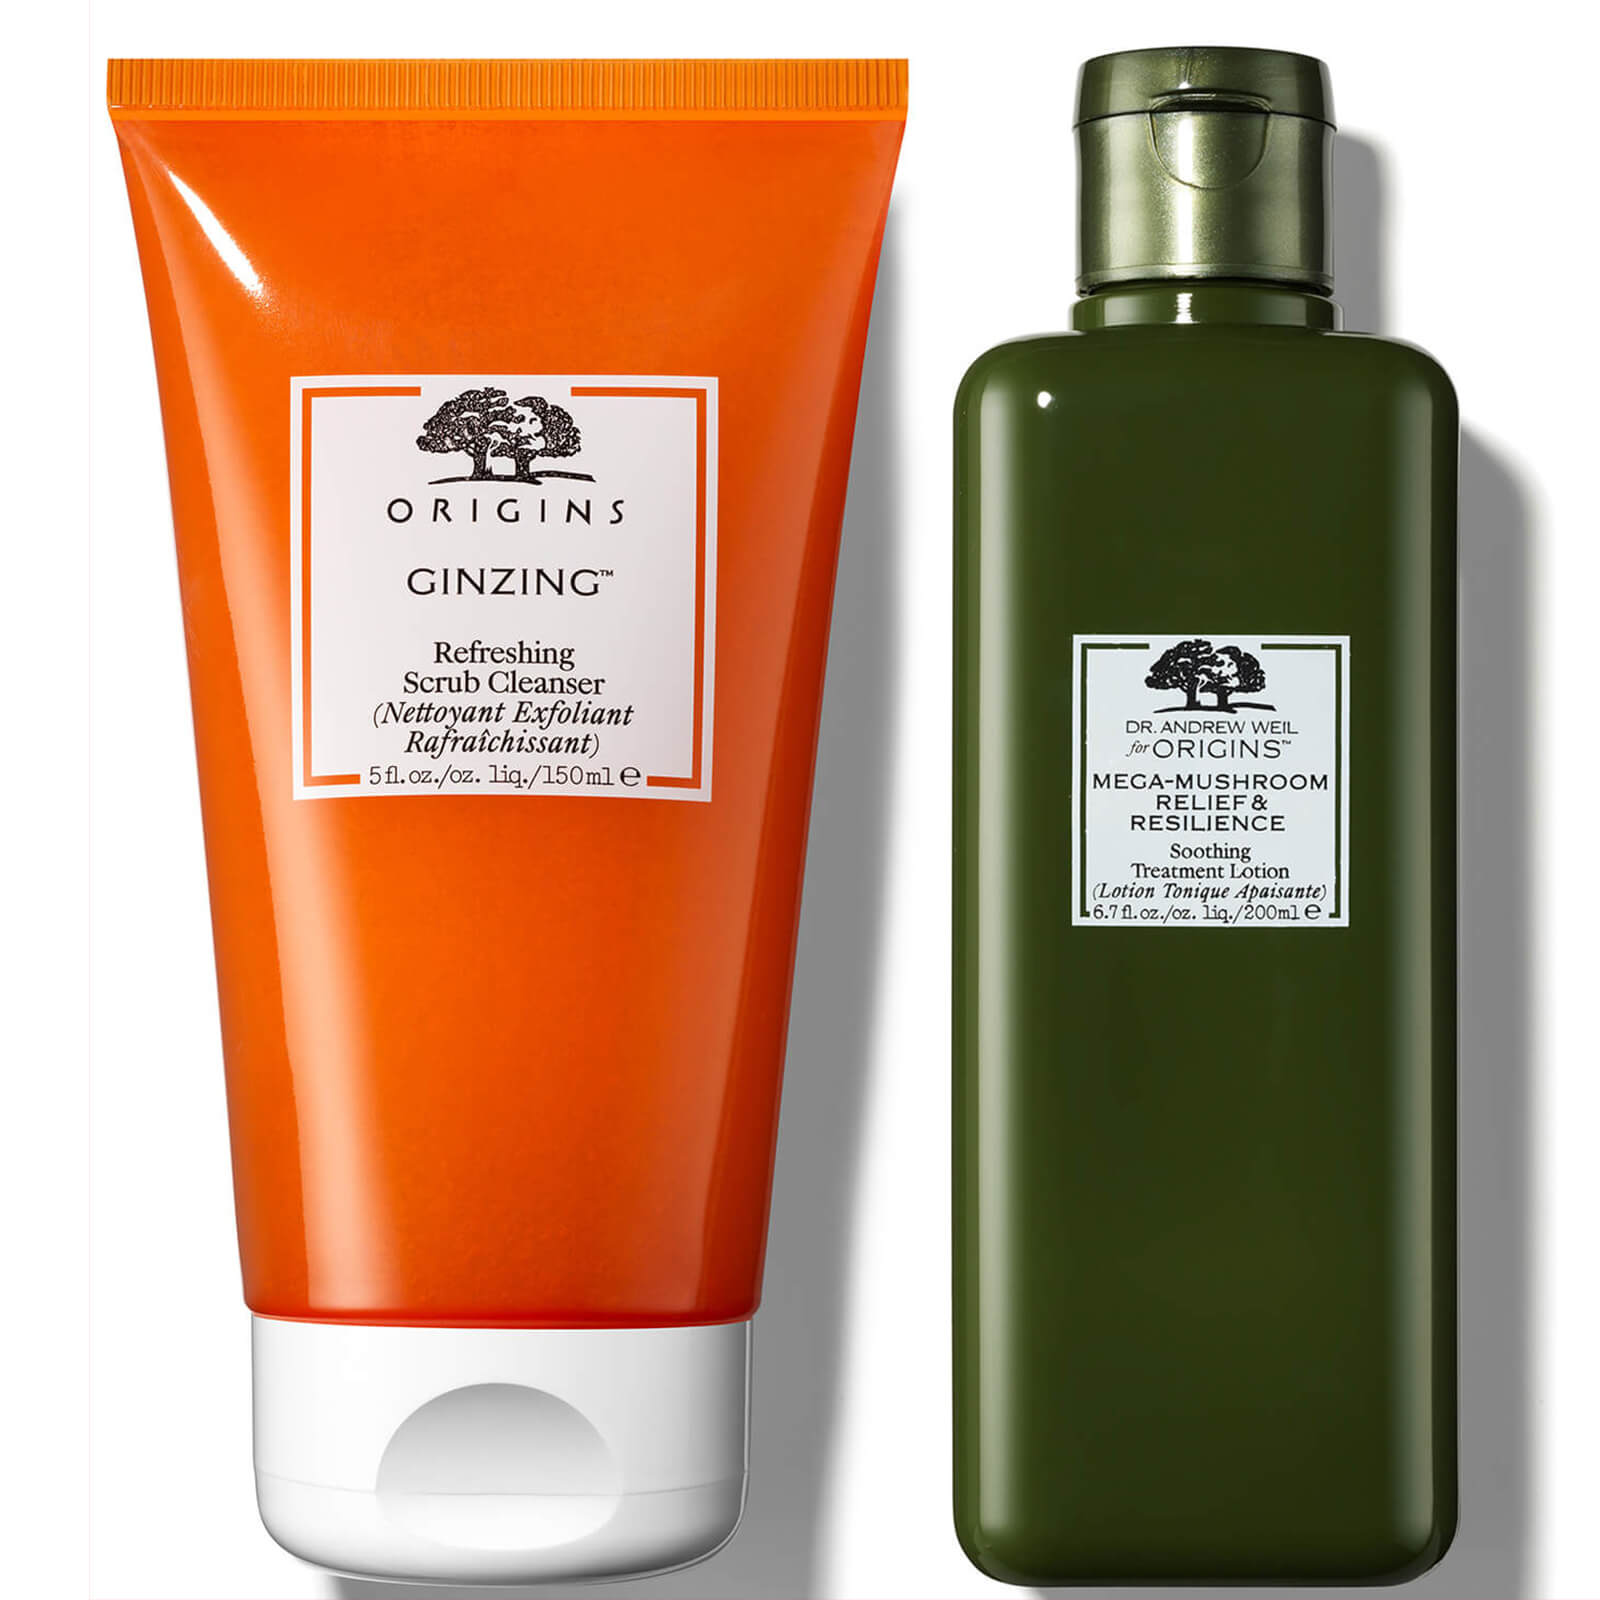 Origins Ginzing Scrub Cleanser and Treatment Lotion Bundle